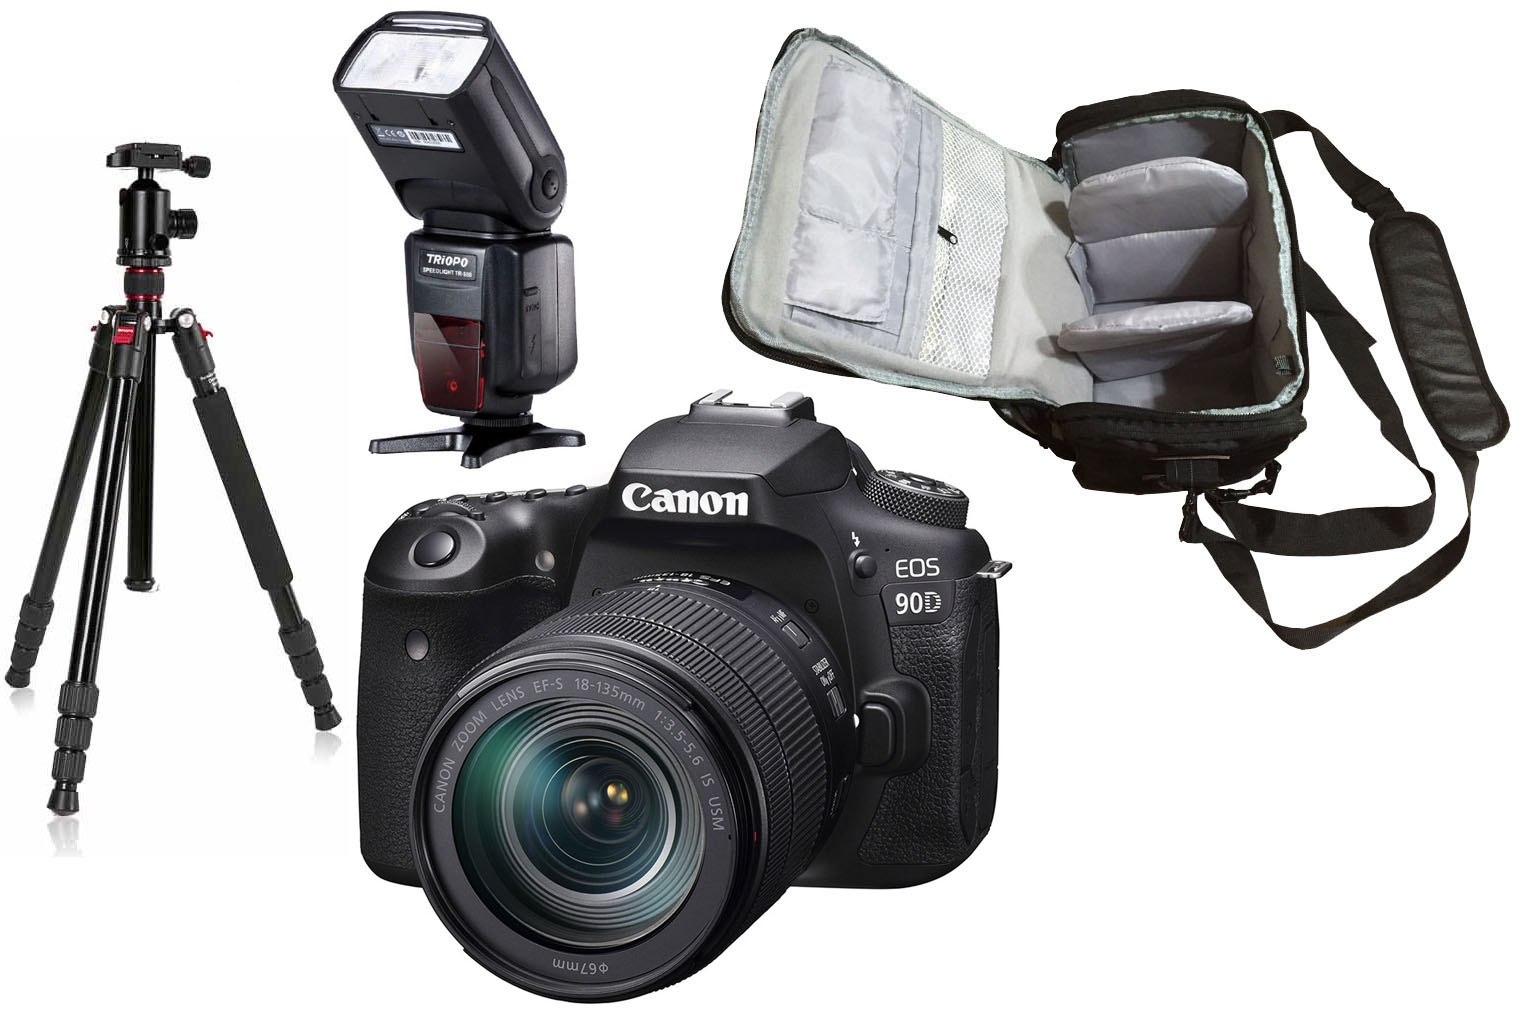 Canon EOS 80D with Sigma 105mm Macro Lens for sale in Co. Cork for €900 on  DoneDeal